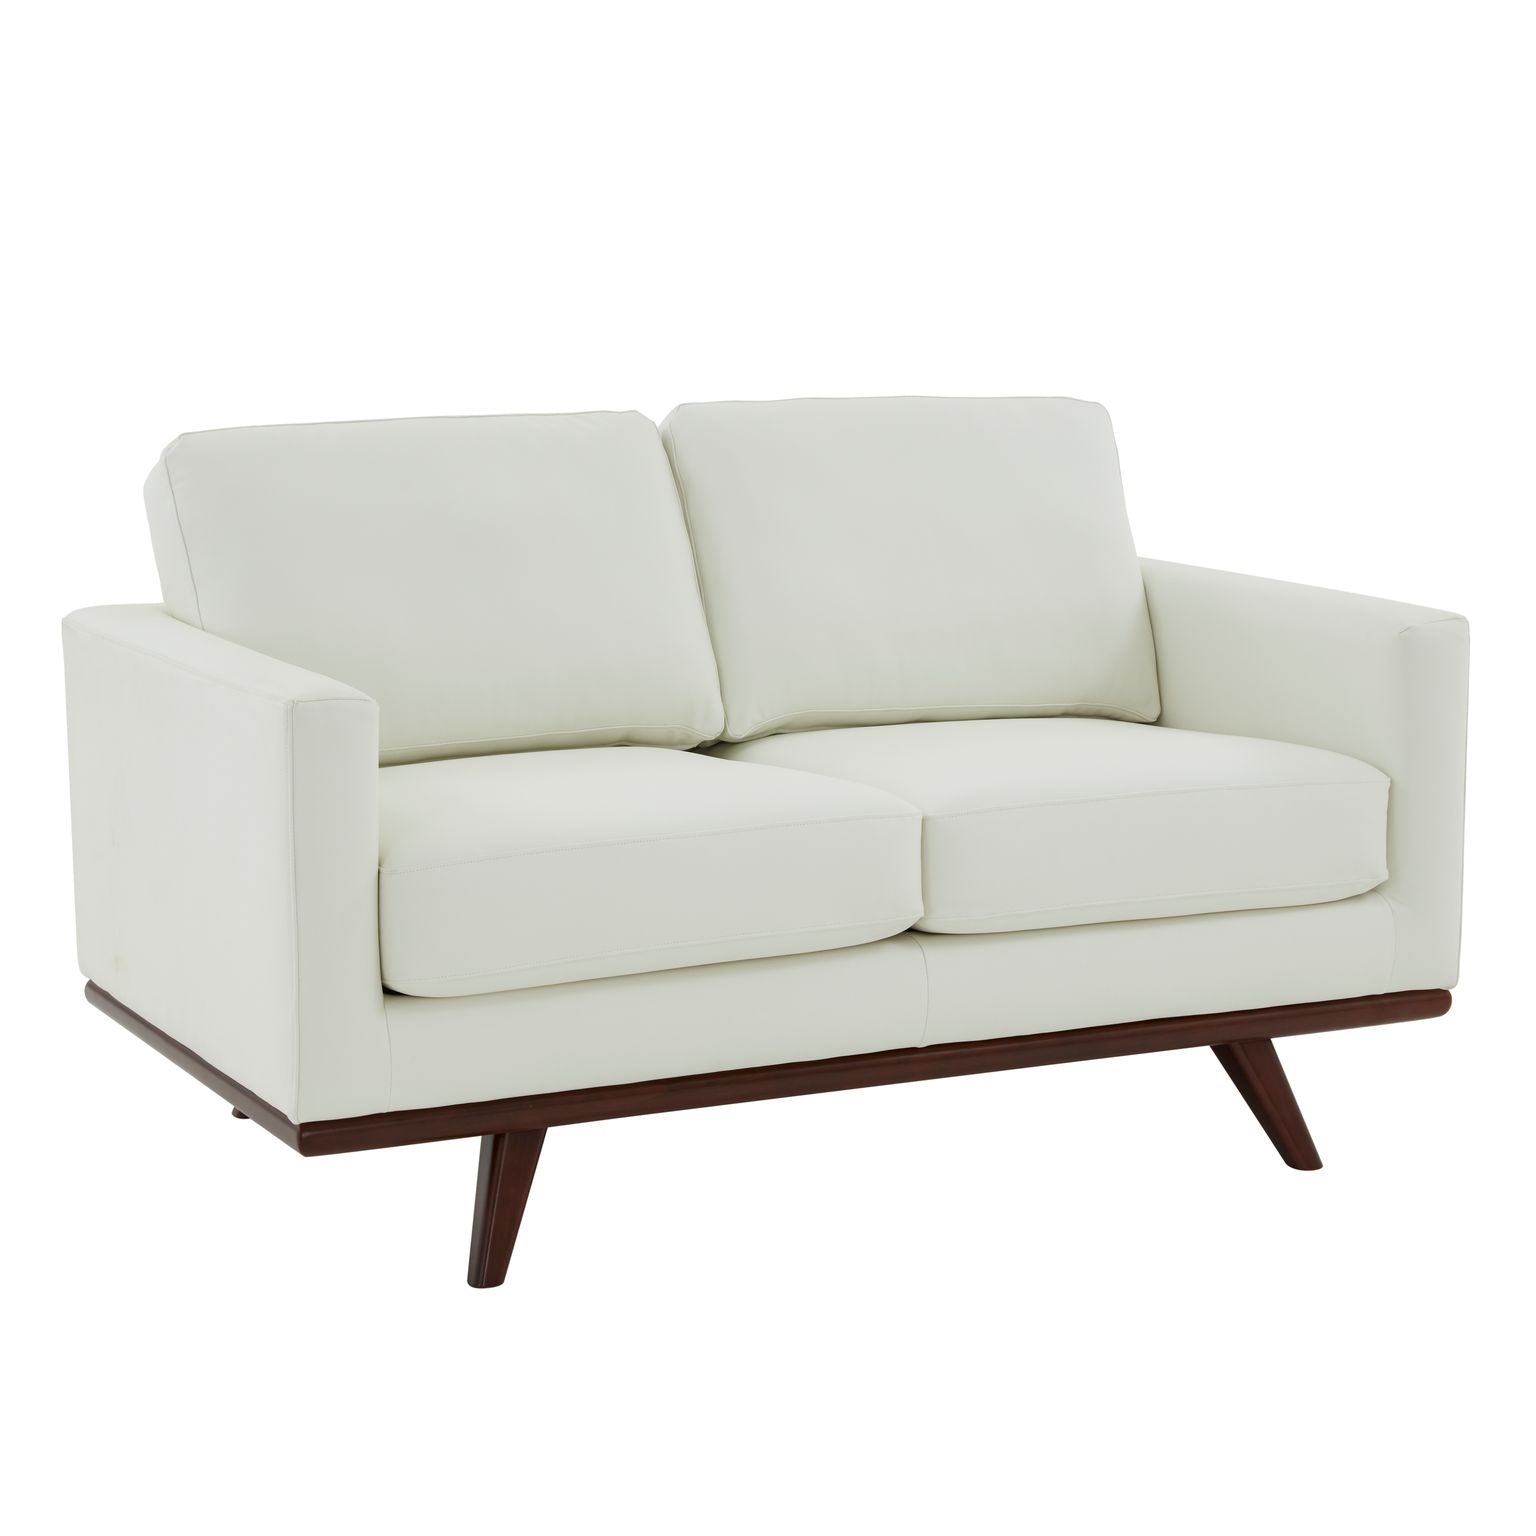 LeisureMod Chester Leather Loveseat - White